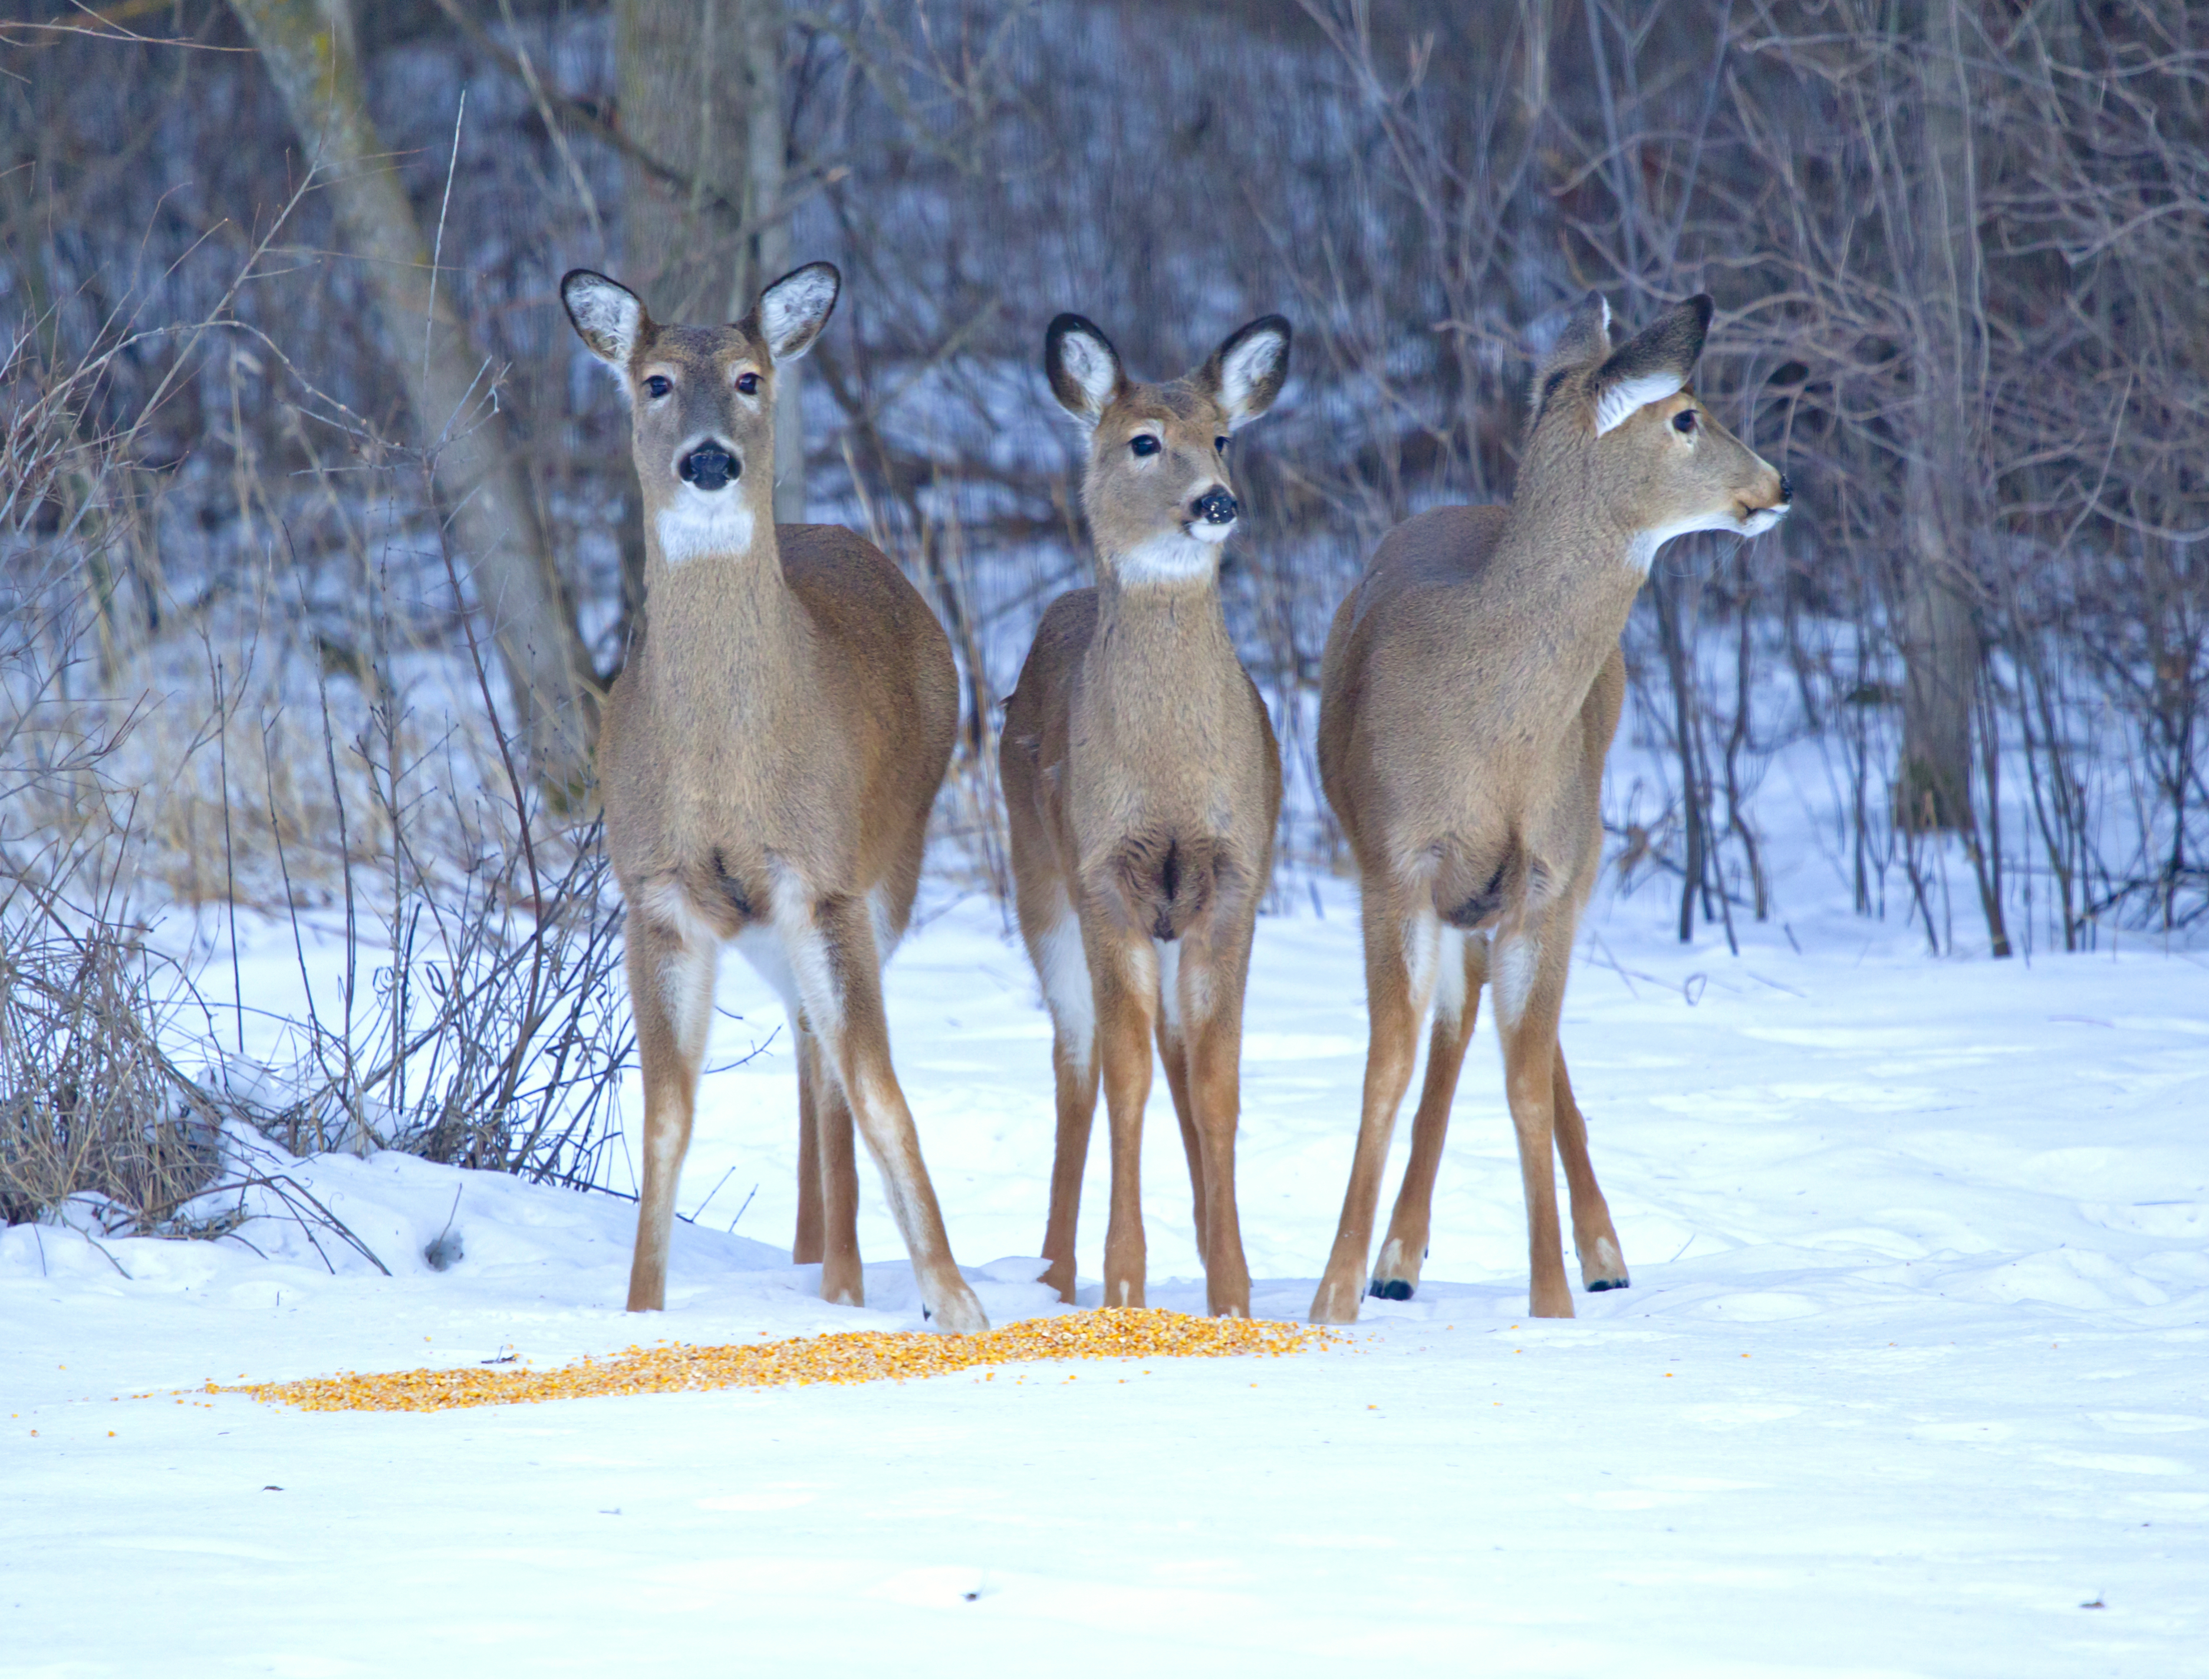 Feeding corn to white-tailed deer in winter